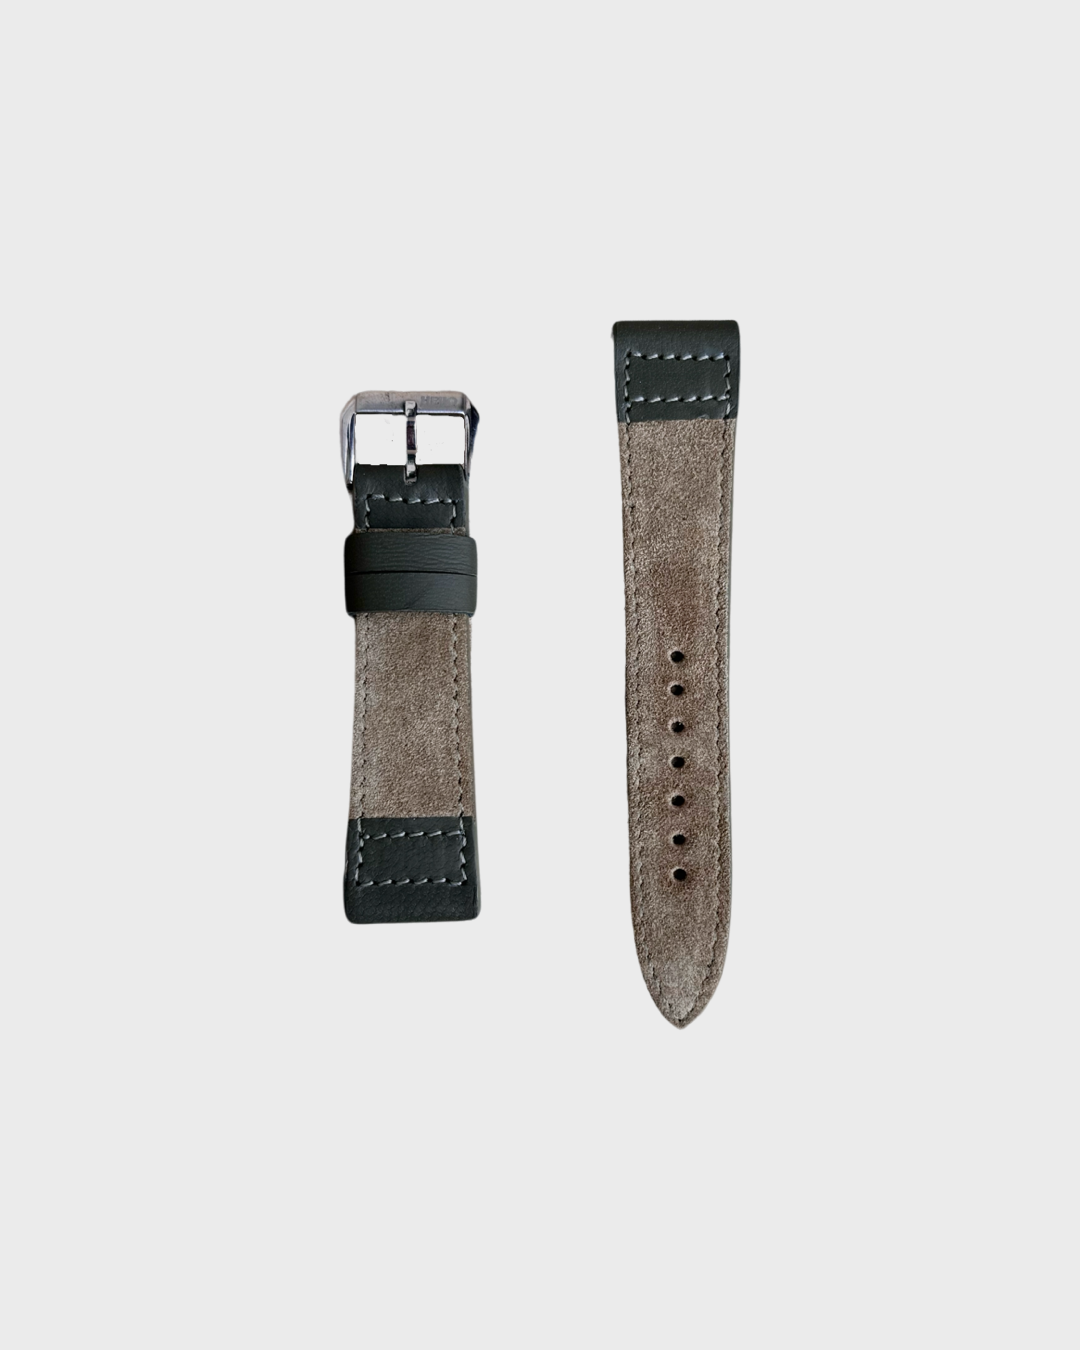 THE SVELTE PILOT STRAP - FOR QUARTZ, MECHANICAL & SMART WATCHES [Pilot-style Stitch in Suede Leather] My Store